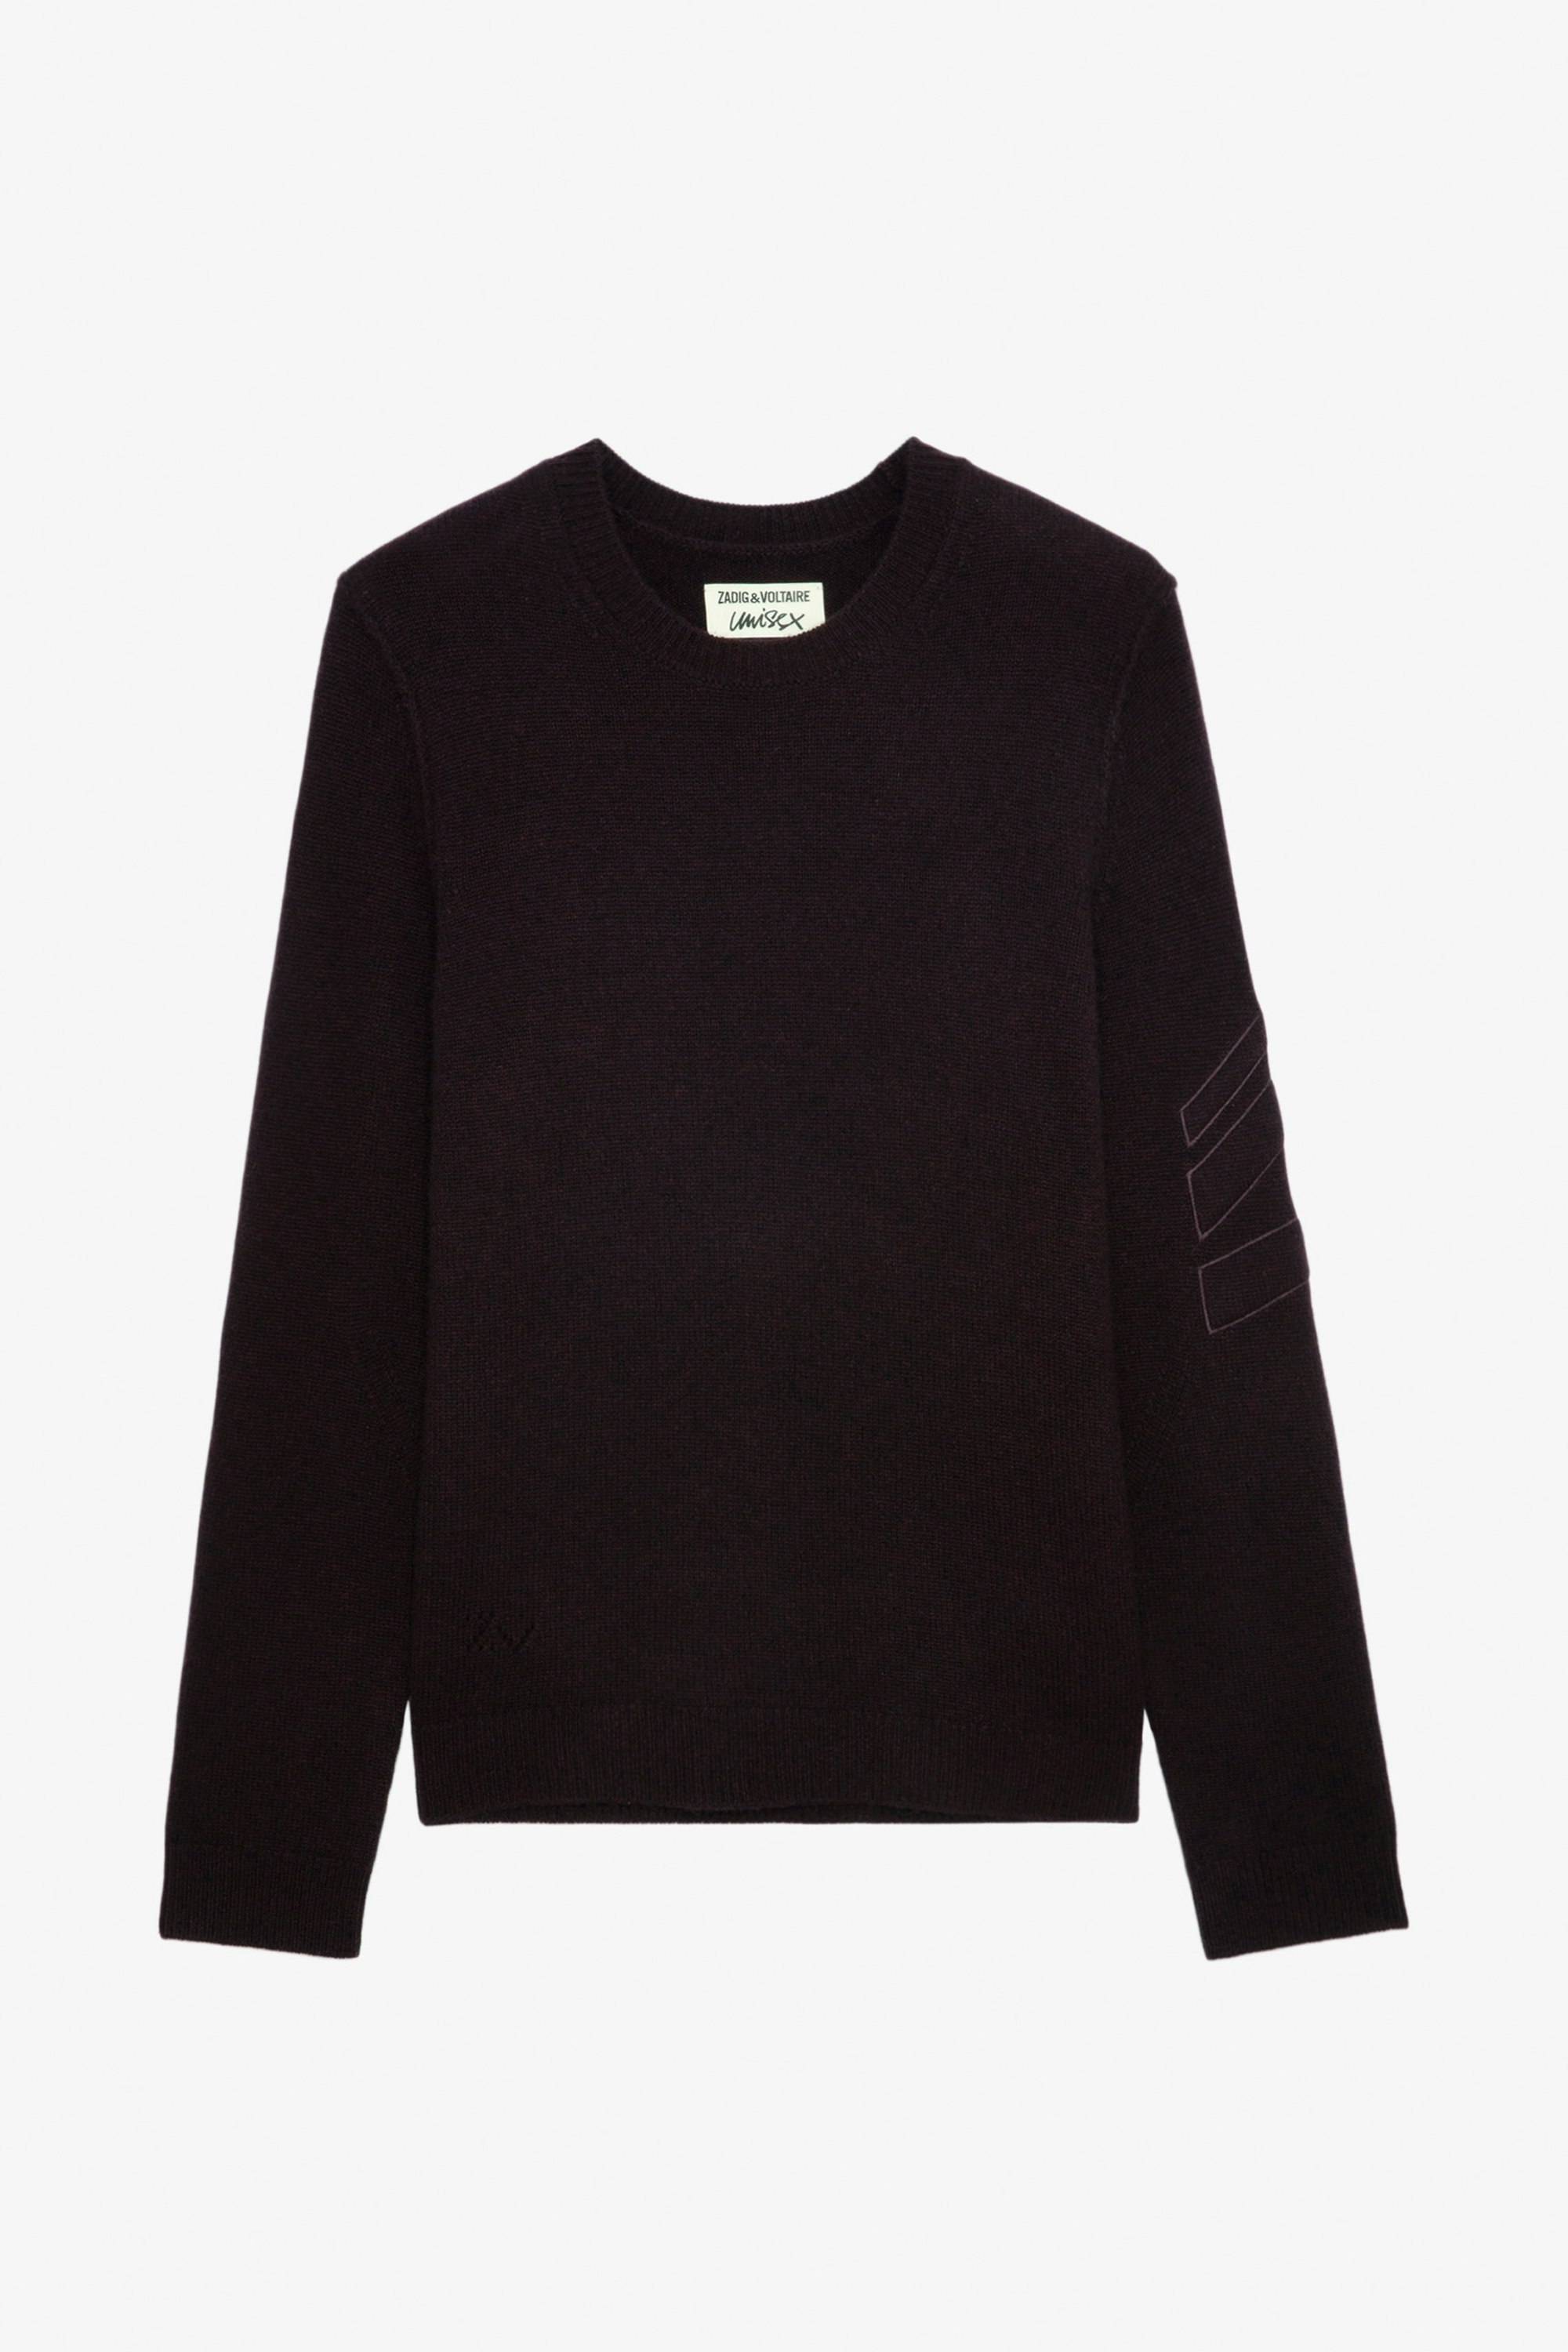 Kennedy Cashmere Jumper - Unisex’s burgundy cashmere jumper with arrows on the sleeve.